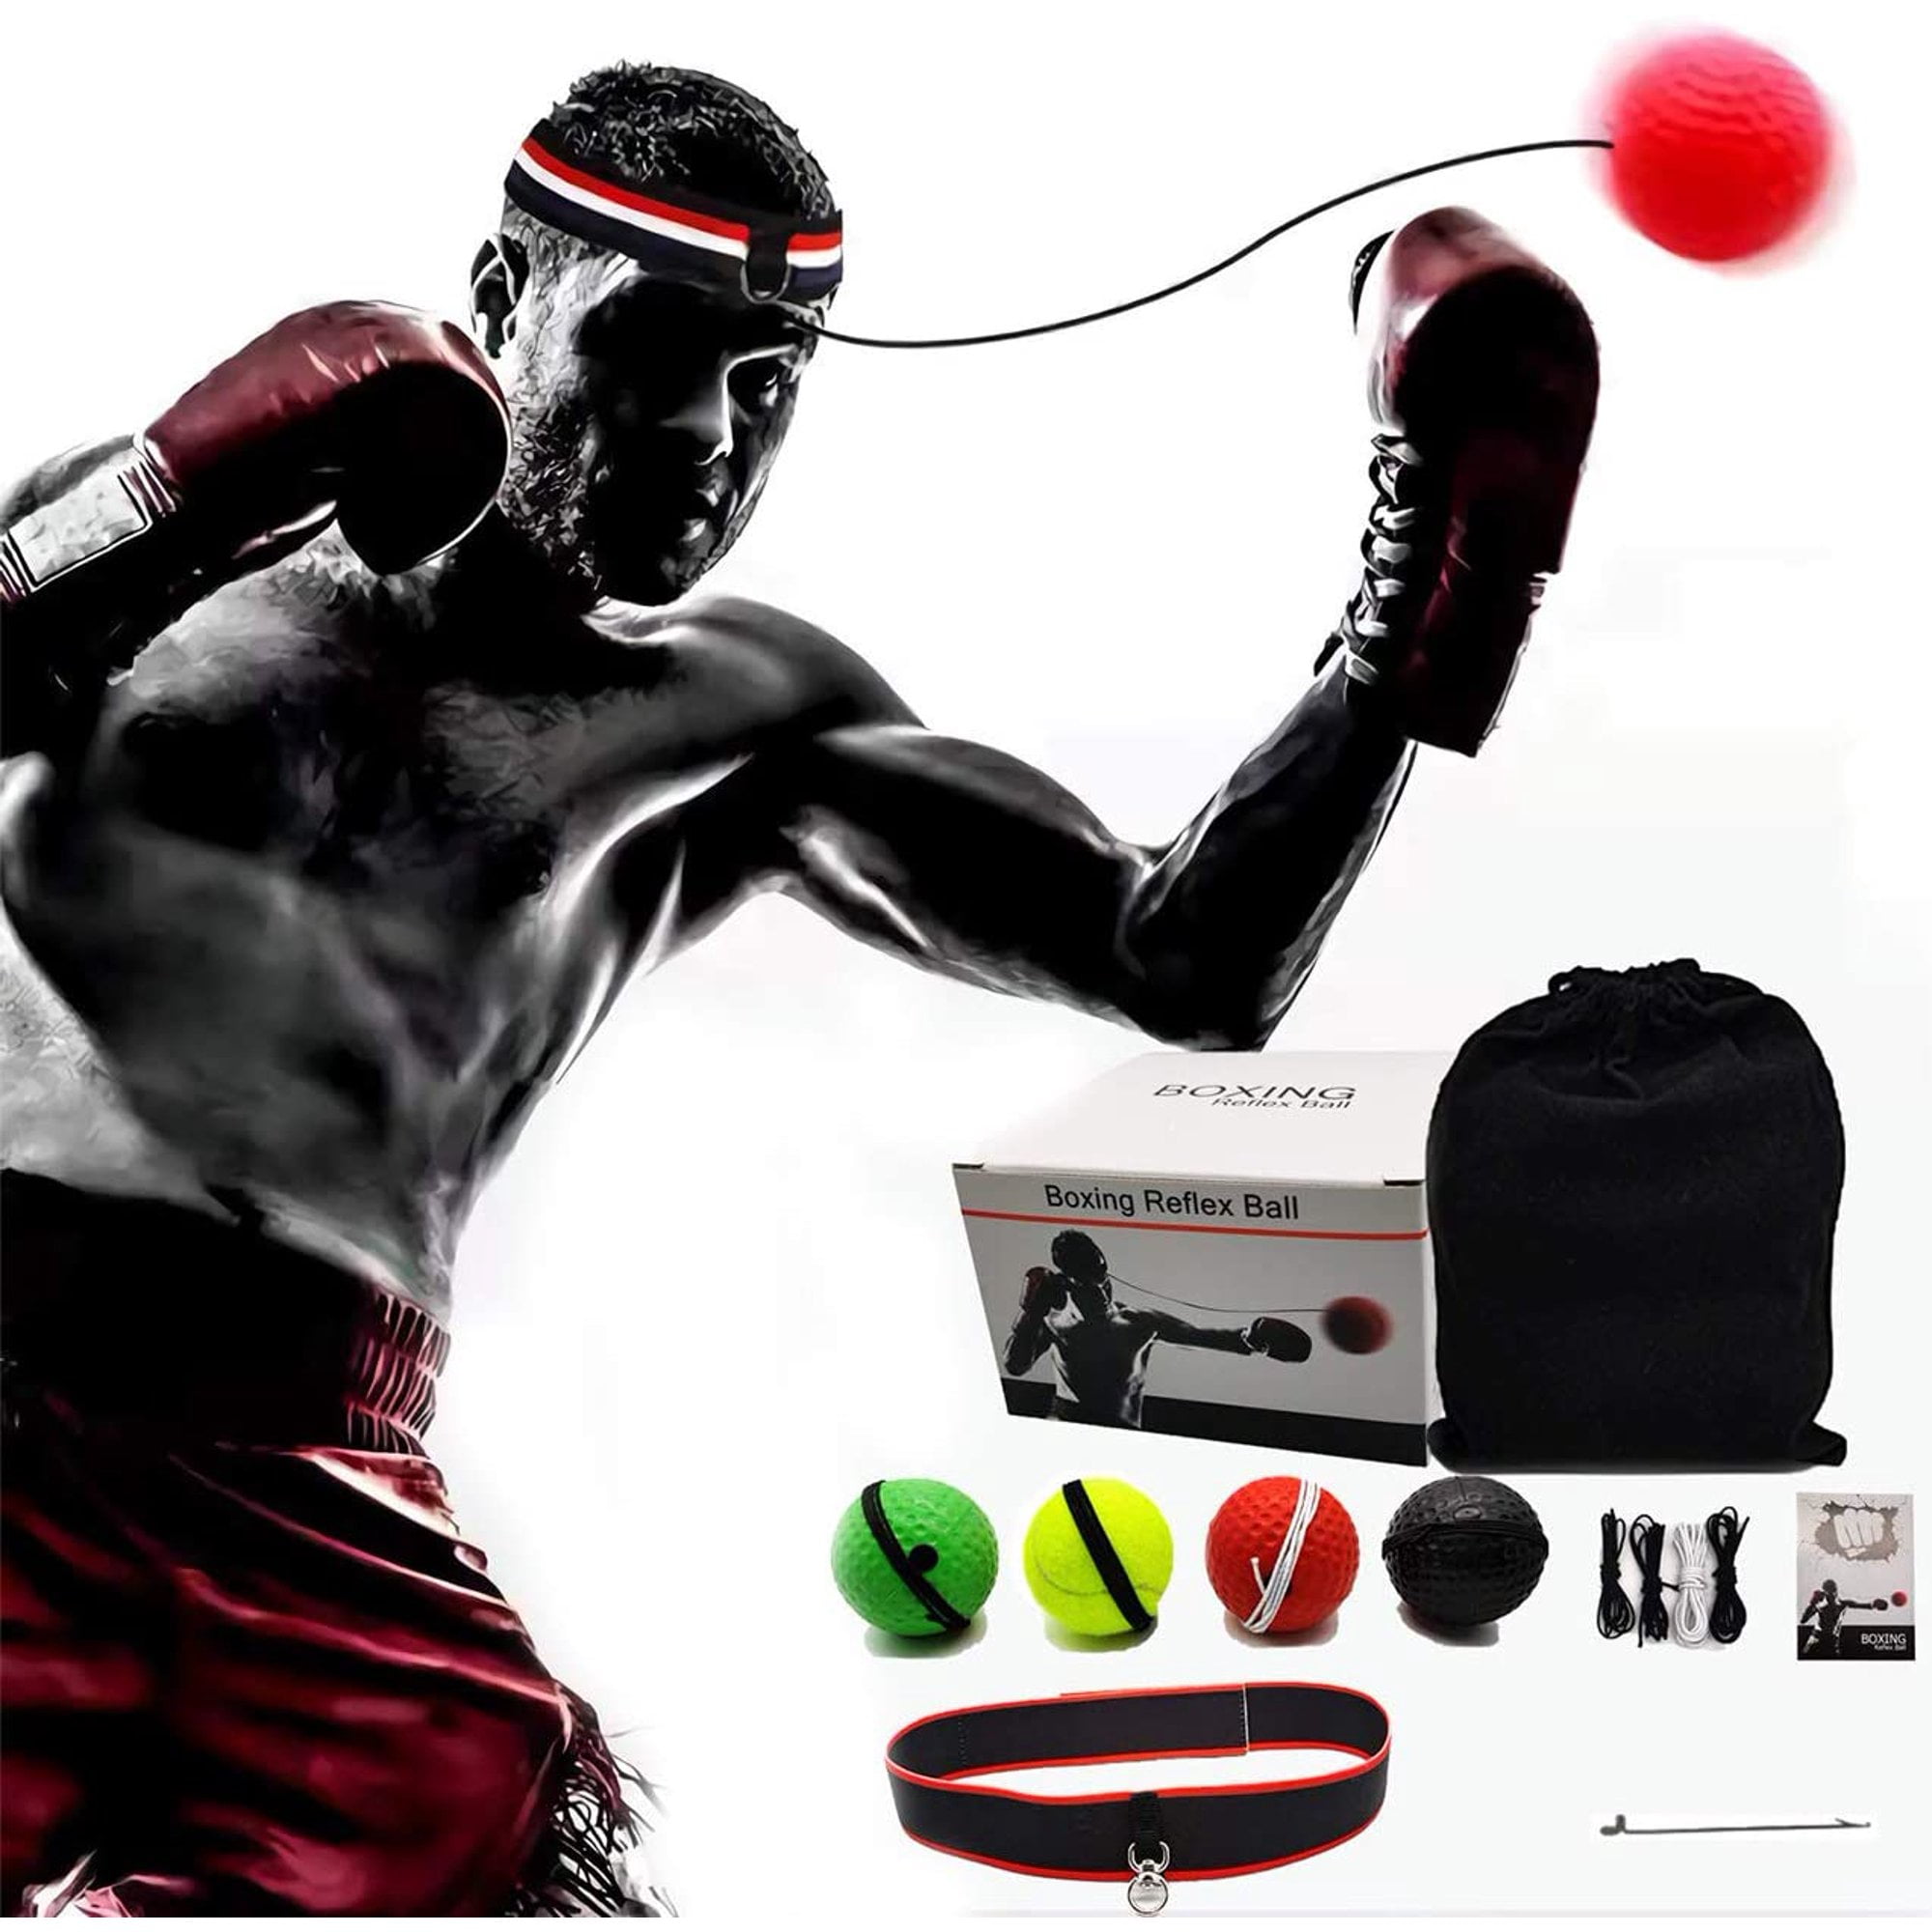 Boxing Fight Ball Reflex Improving Speed Reactions Hand Eye Coordination 